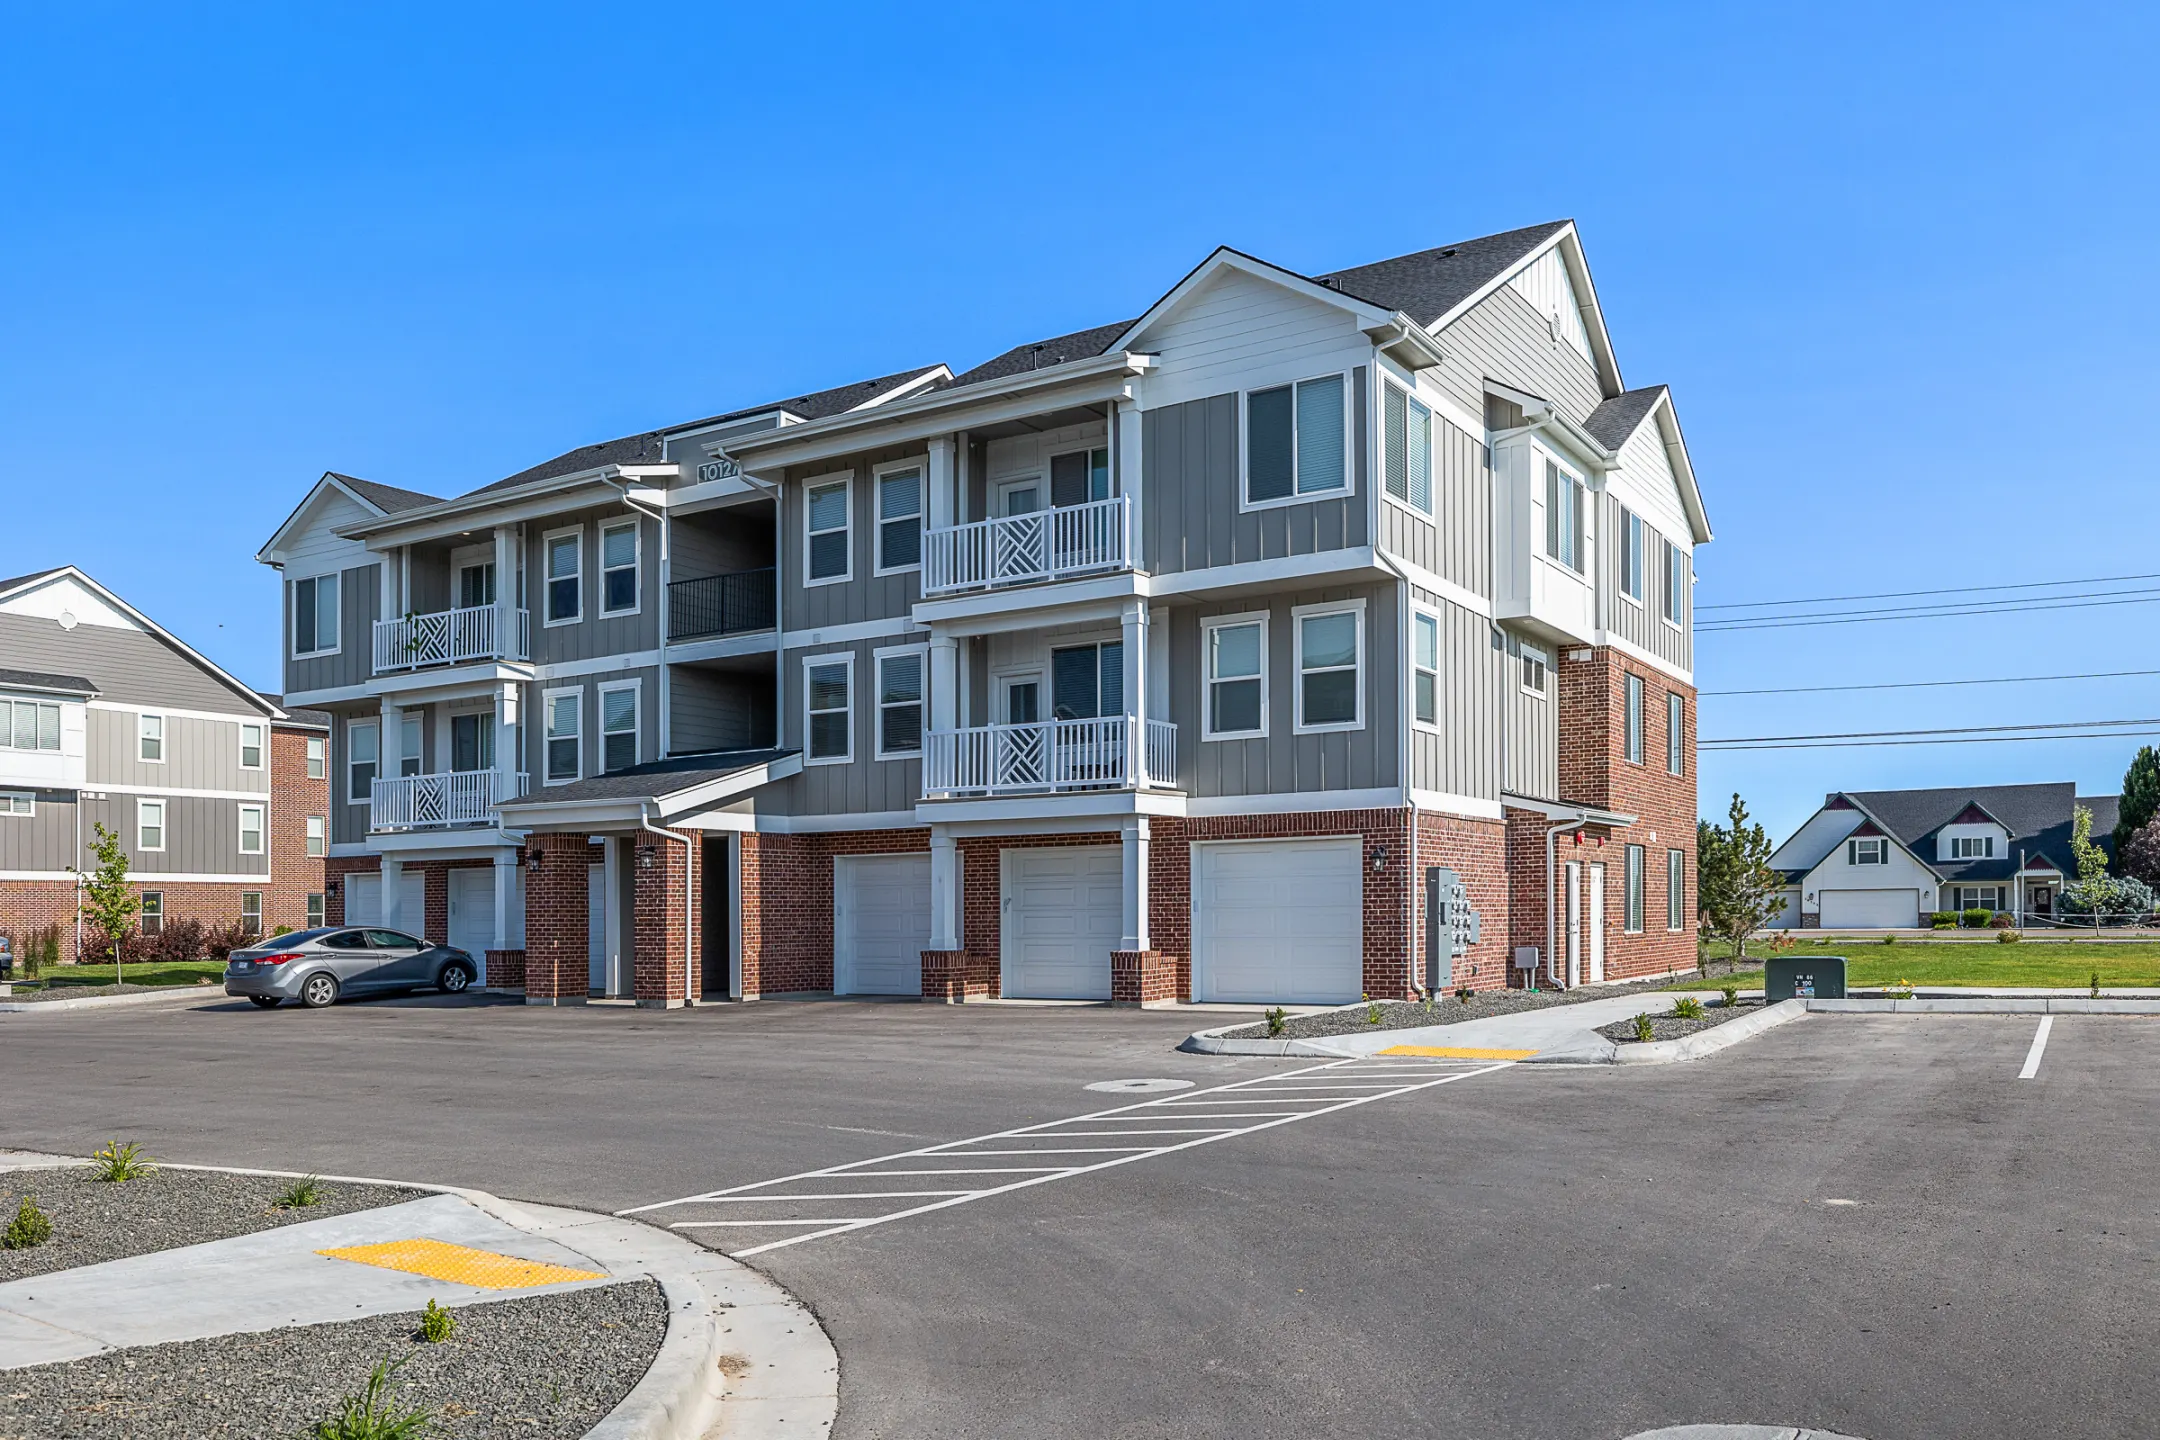 Building - The Farmstead Apartments - Nampa, ID